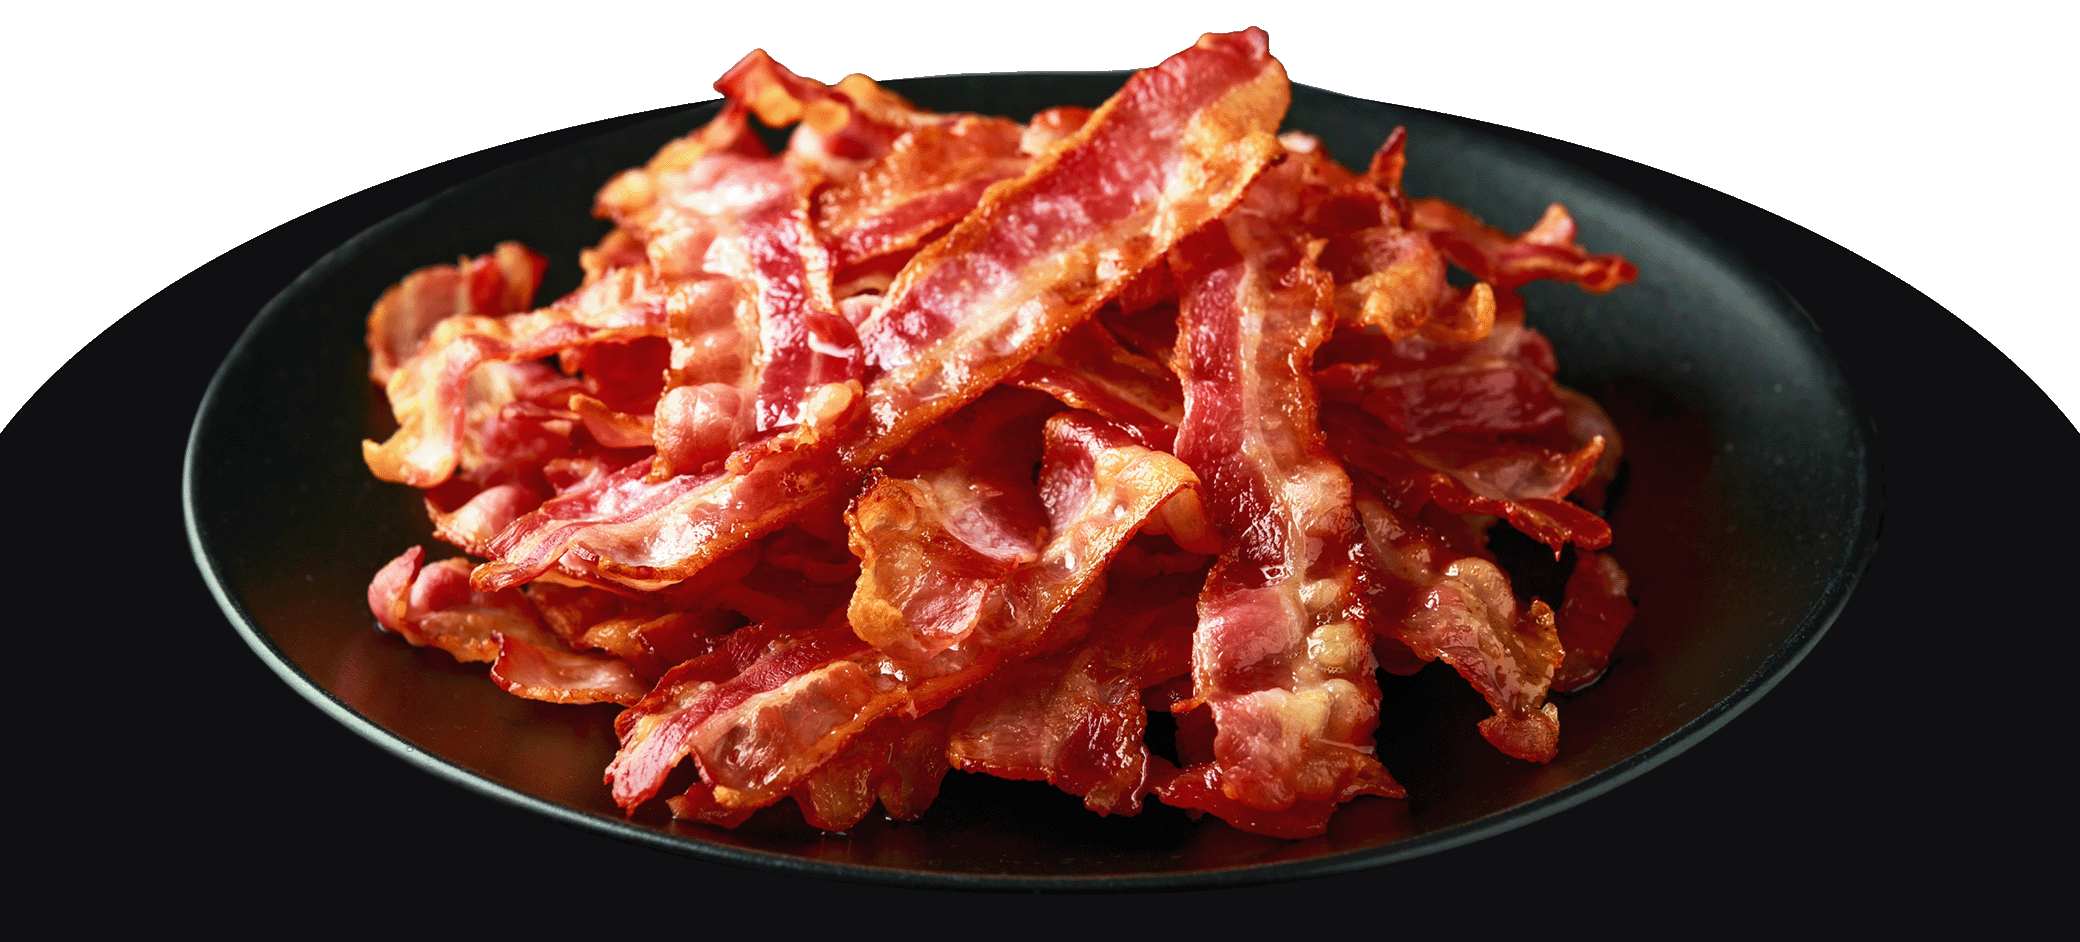 Plate of Bacon